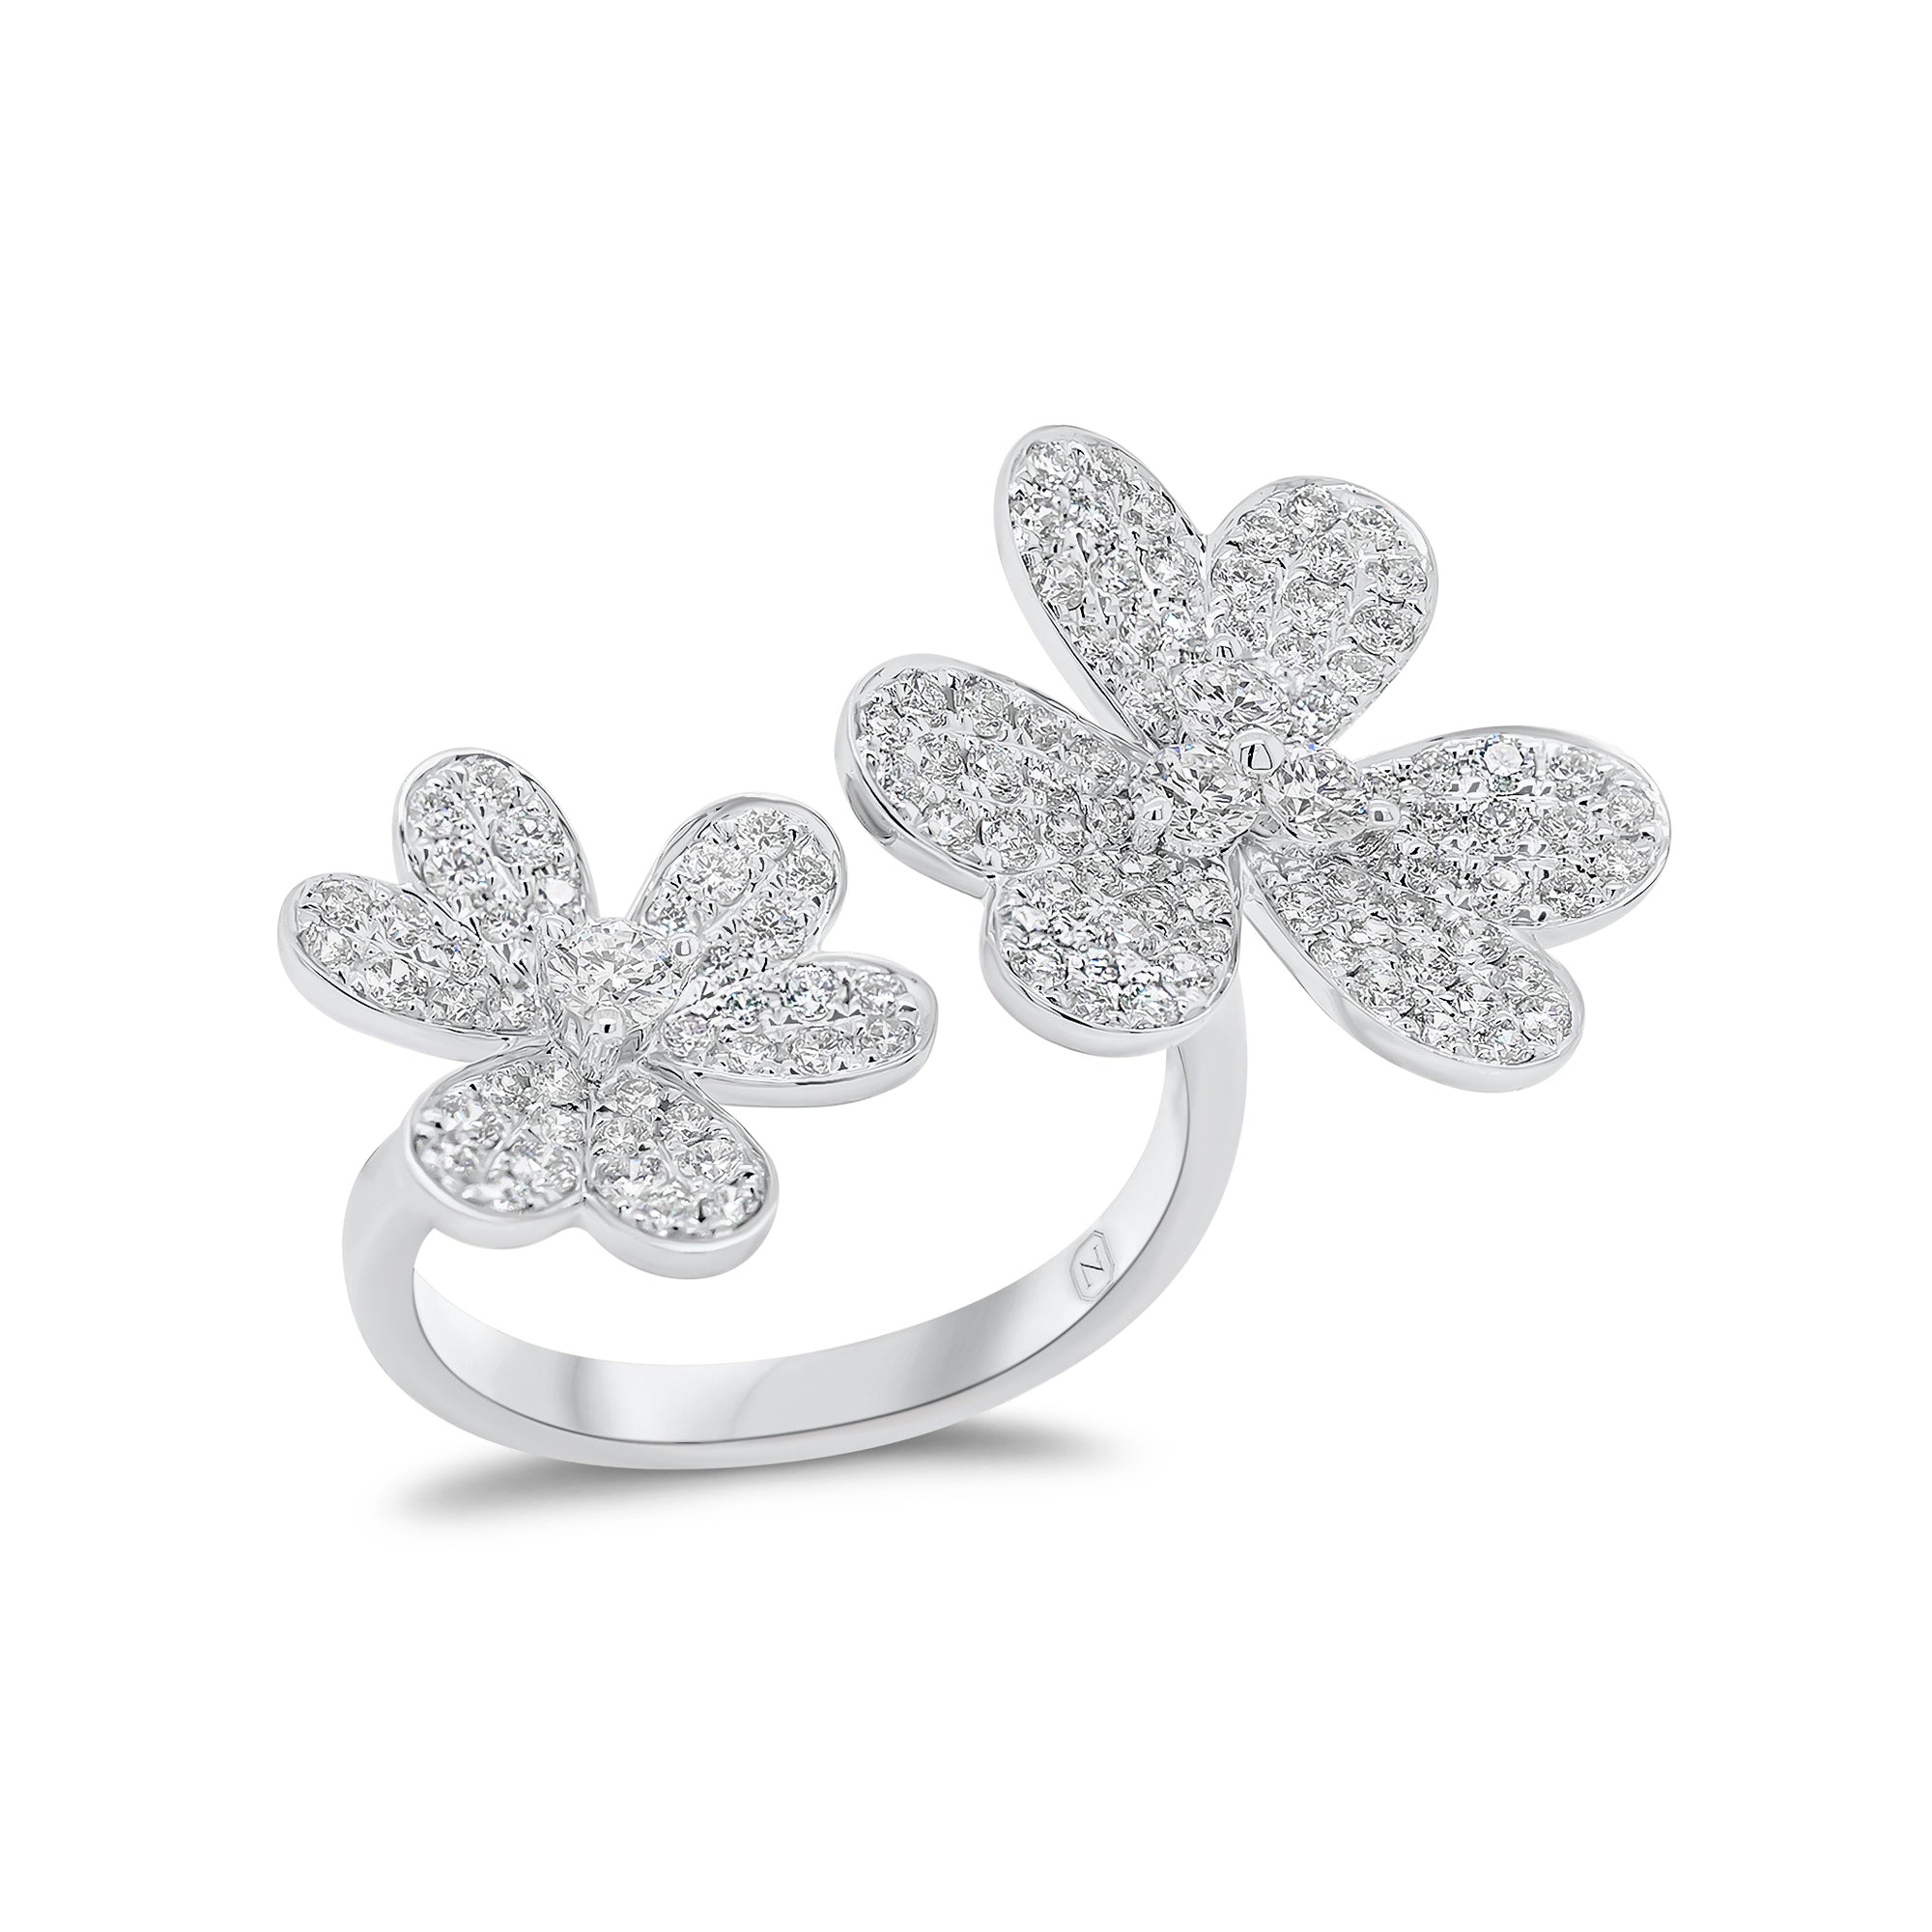 Diamond Double Flower Open Ring - 18K gold weighing 5.66 grams  - 124 round diamonds weighing 1.19 carats